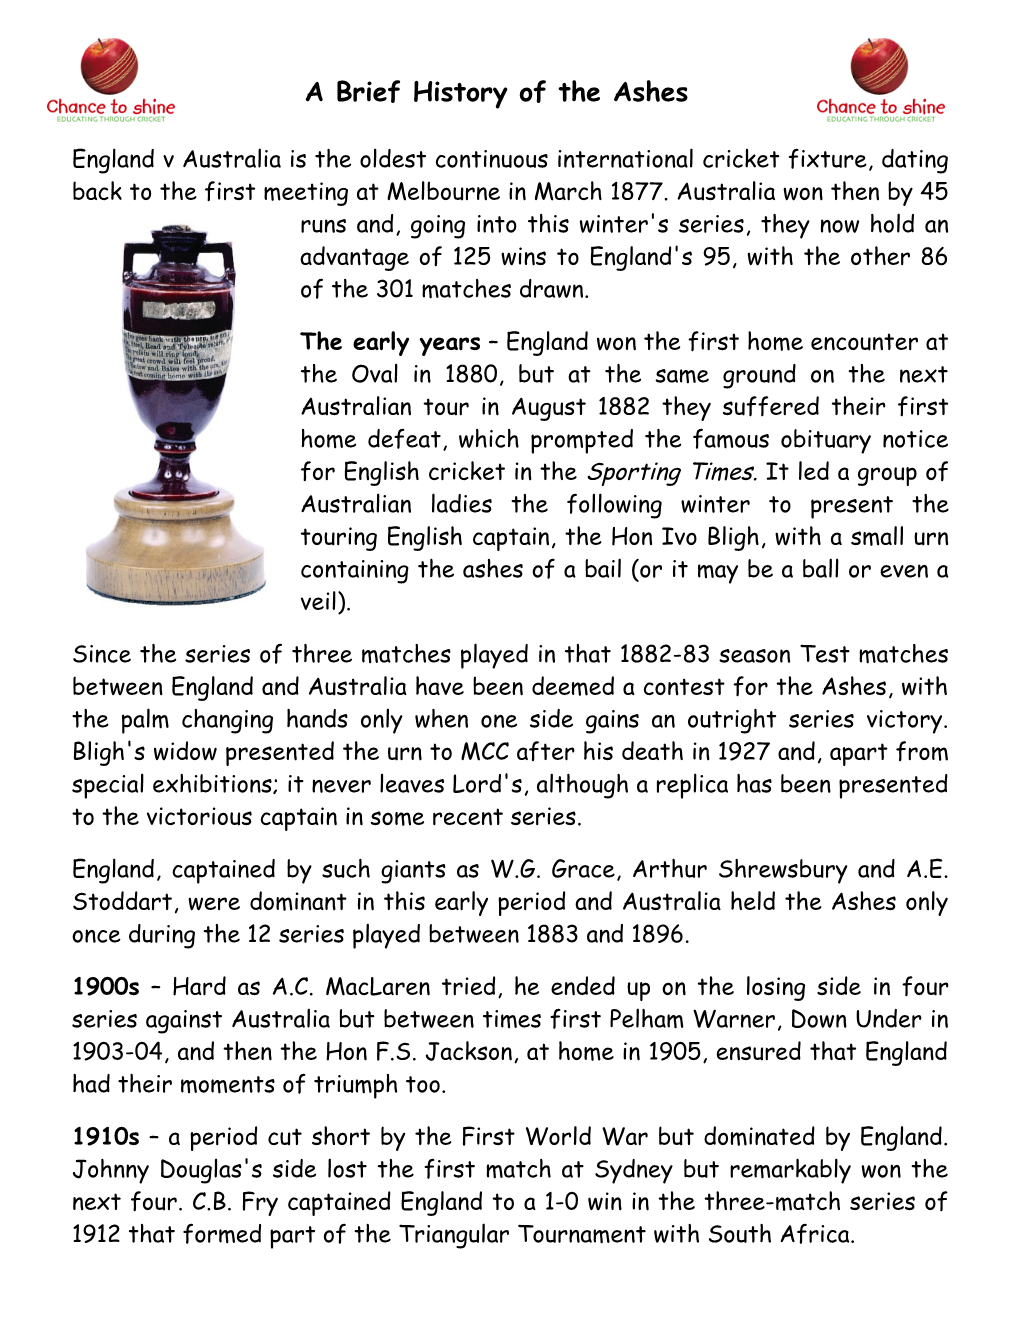 A Brief History of the Ashes